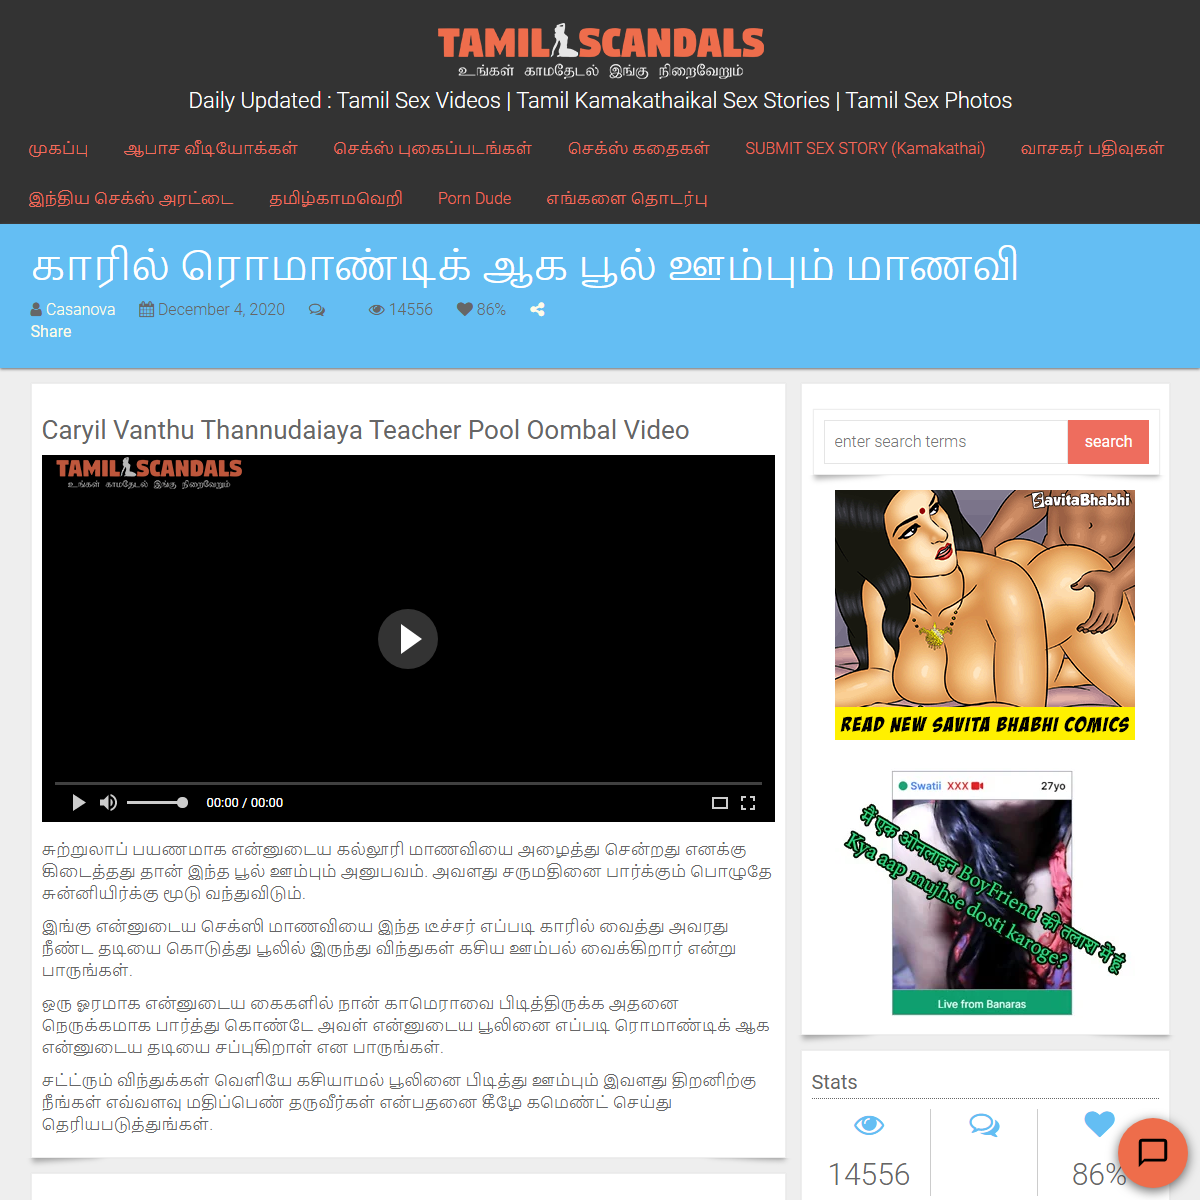 A complete backup of https://www.tamilscandals.com/vinthu-vilunguthal/car-pool-oombal-romantic-aabasam/